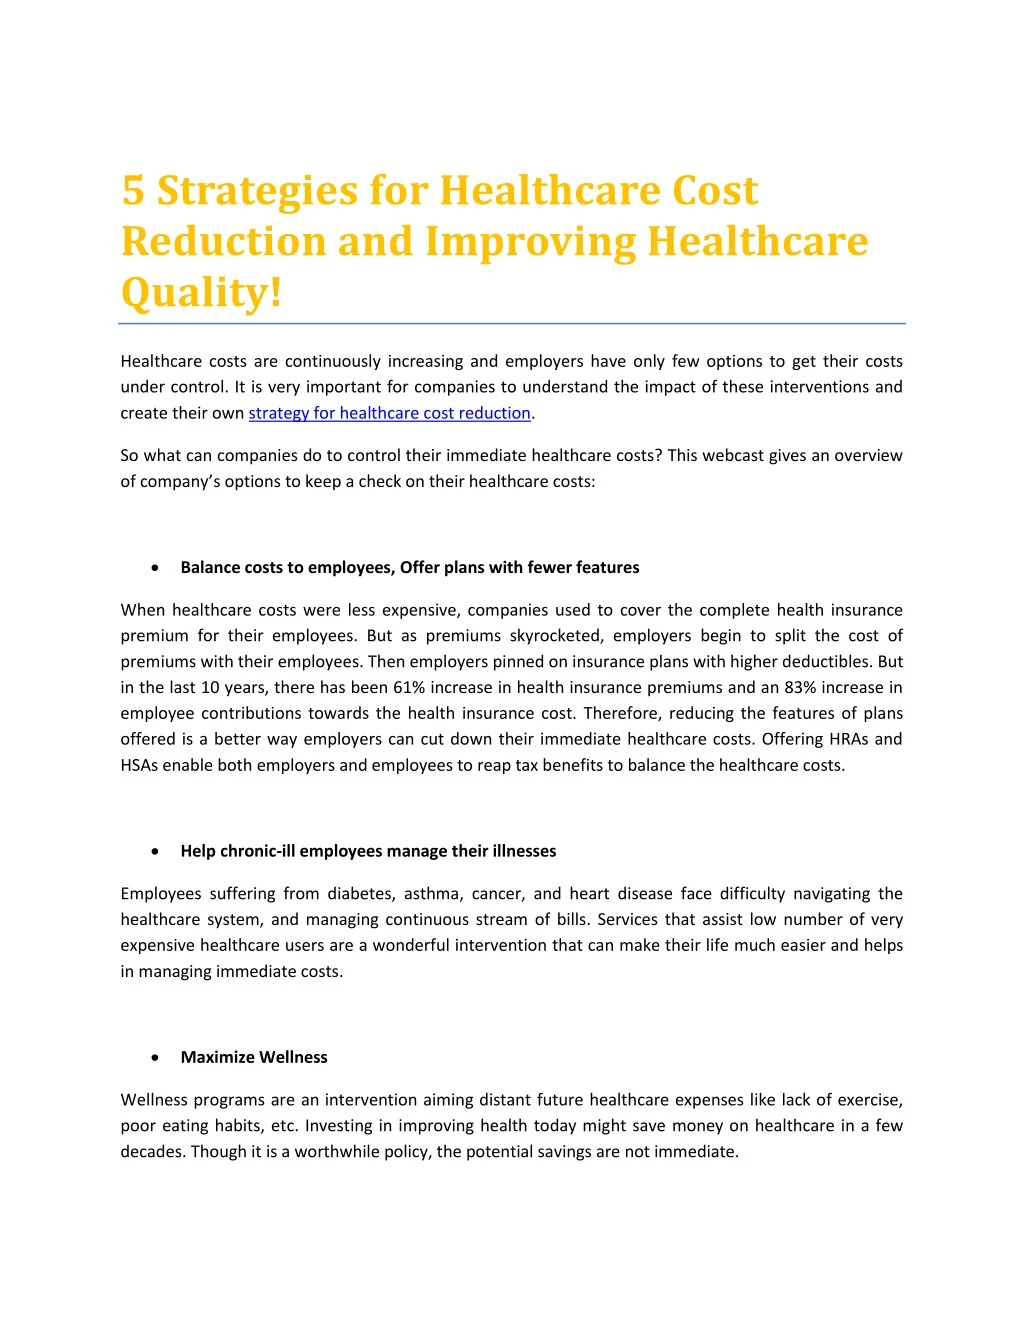 5 strategies for healthcare cost reduction